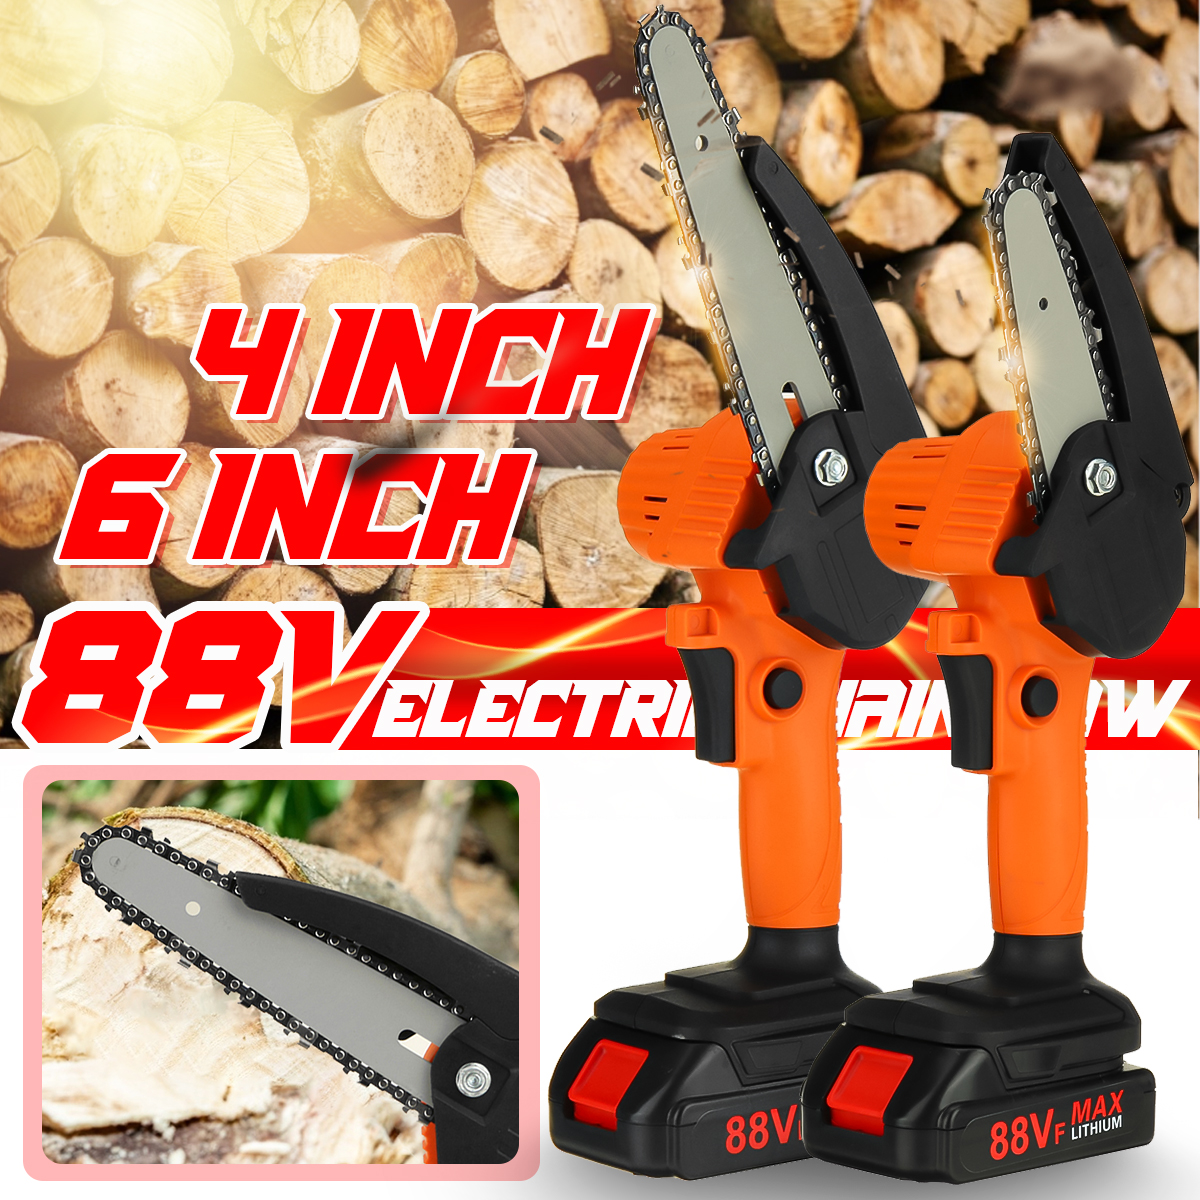 4In6Inch-Mini-Rechargable-Chiansaw-Electric-WoodWorking-Chain-Saw-For-Makita-1885577-1